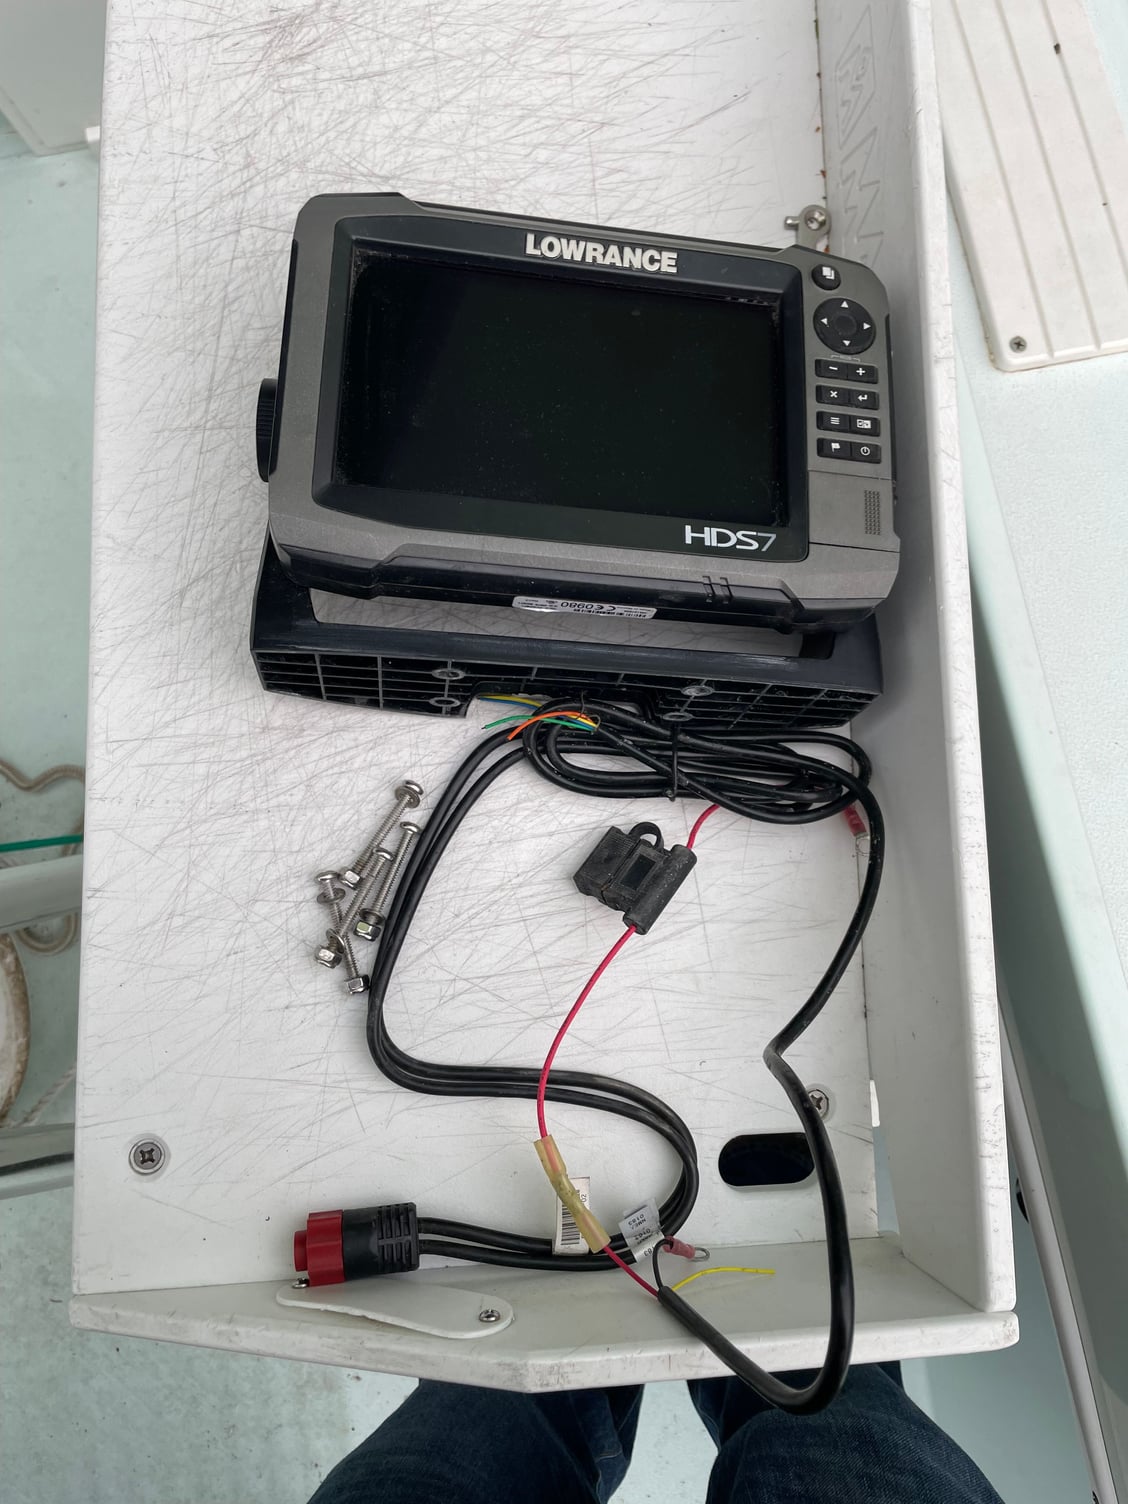 Lowrance 3 in 1 transducer interference -help - The Hull Truth - Boating  and Fishing Forum